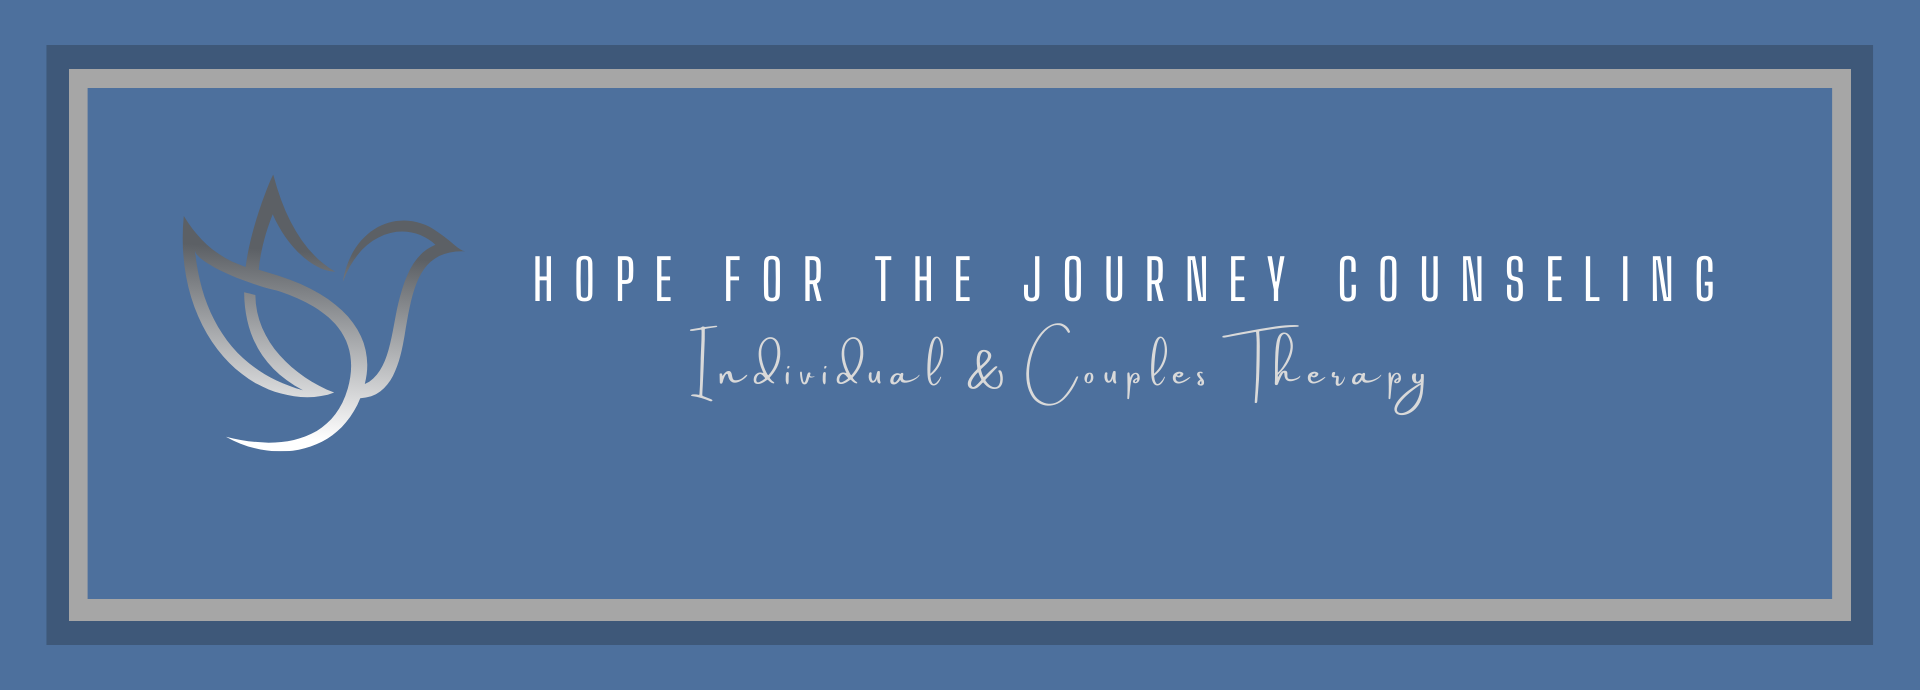 Hope for the Journey Counseling logo